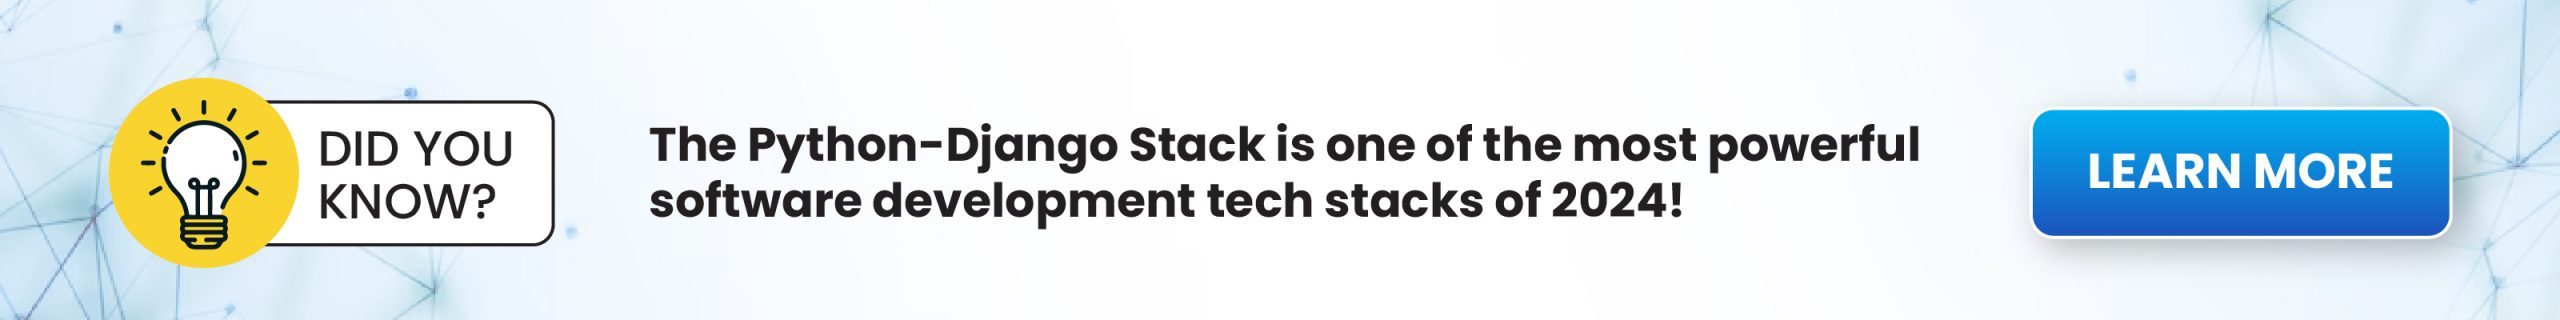 The Python-Django Stack is one of the most powerful software development tech stacks of 2024!